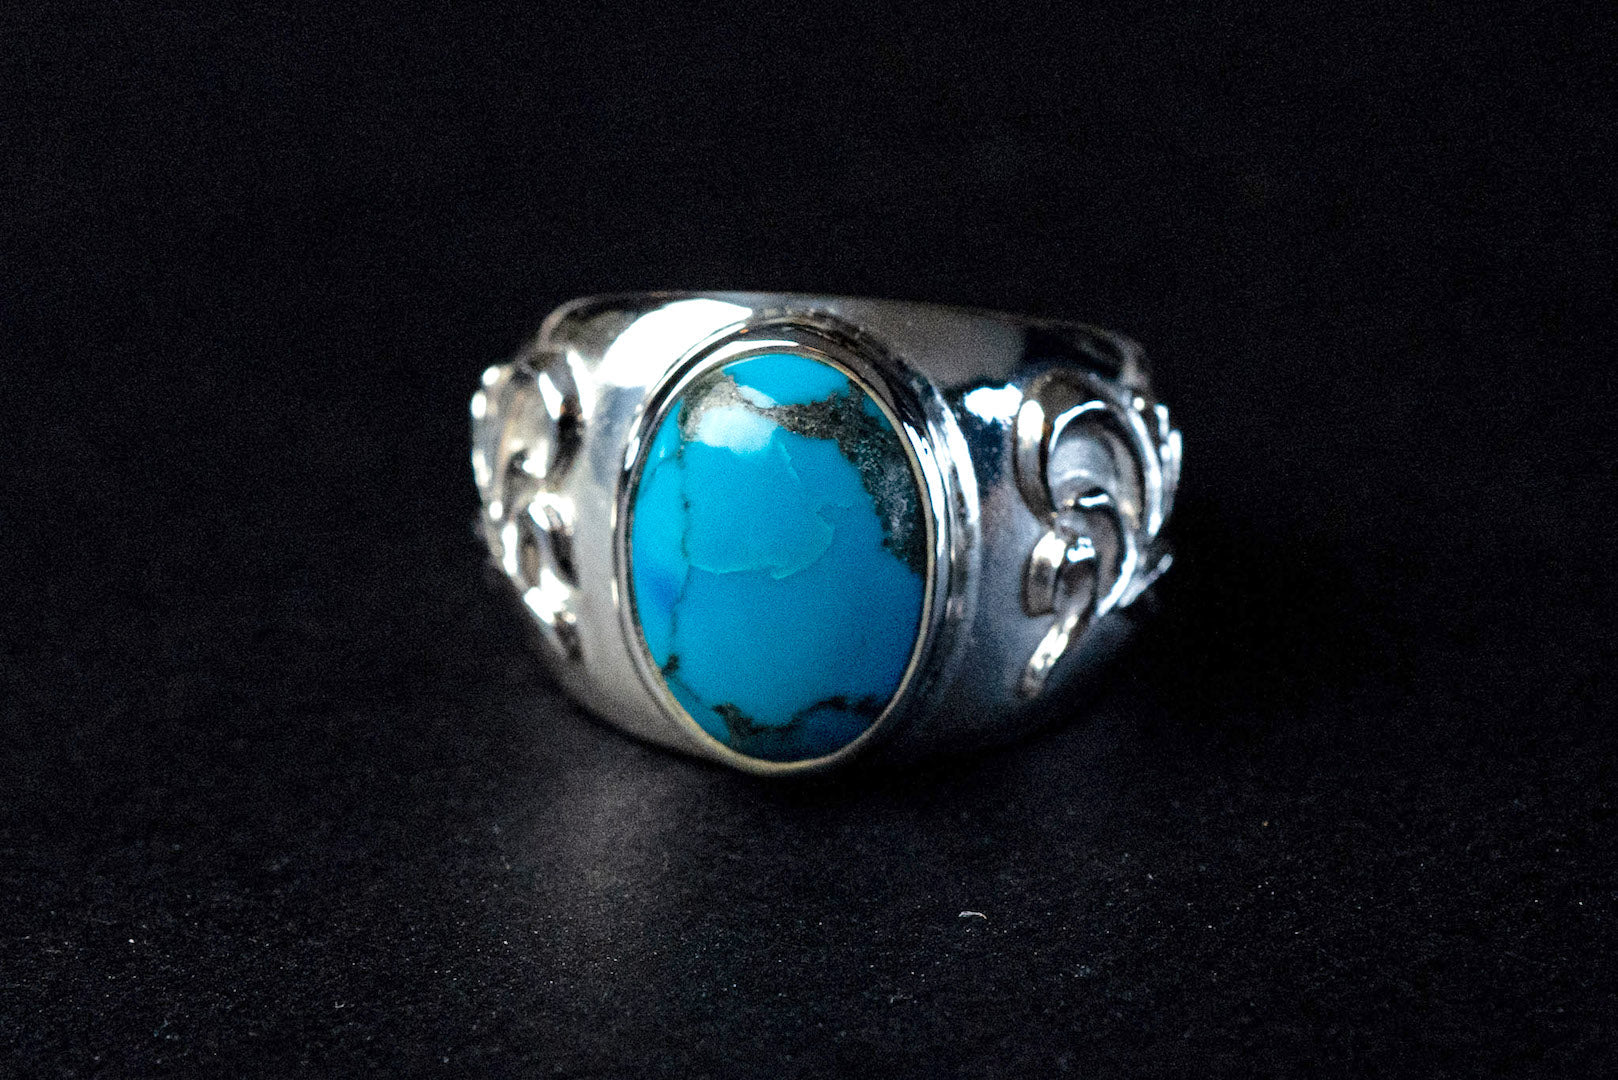 Legend Standard Size "Ivy" College Ring With Turquoise (R-12-S-TQ)